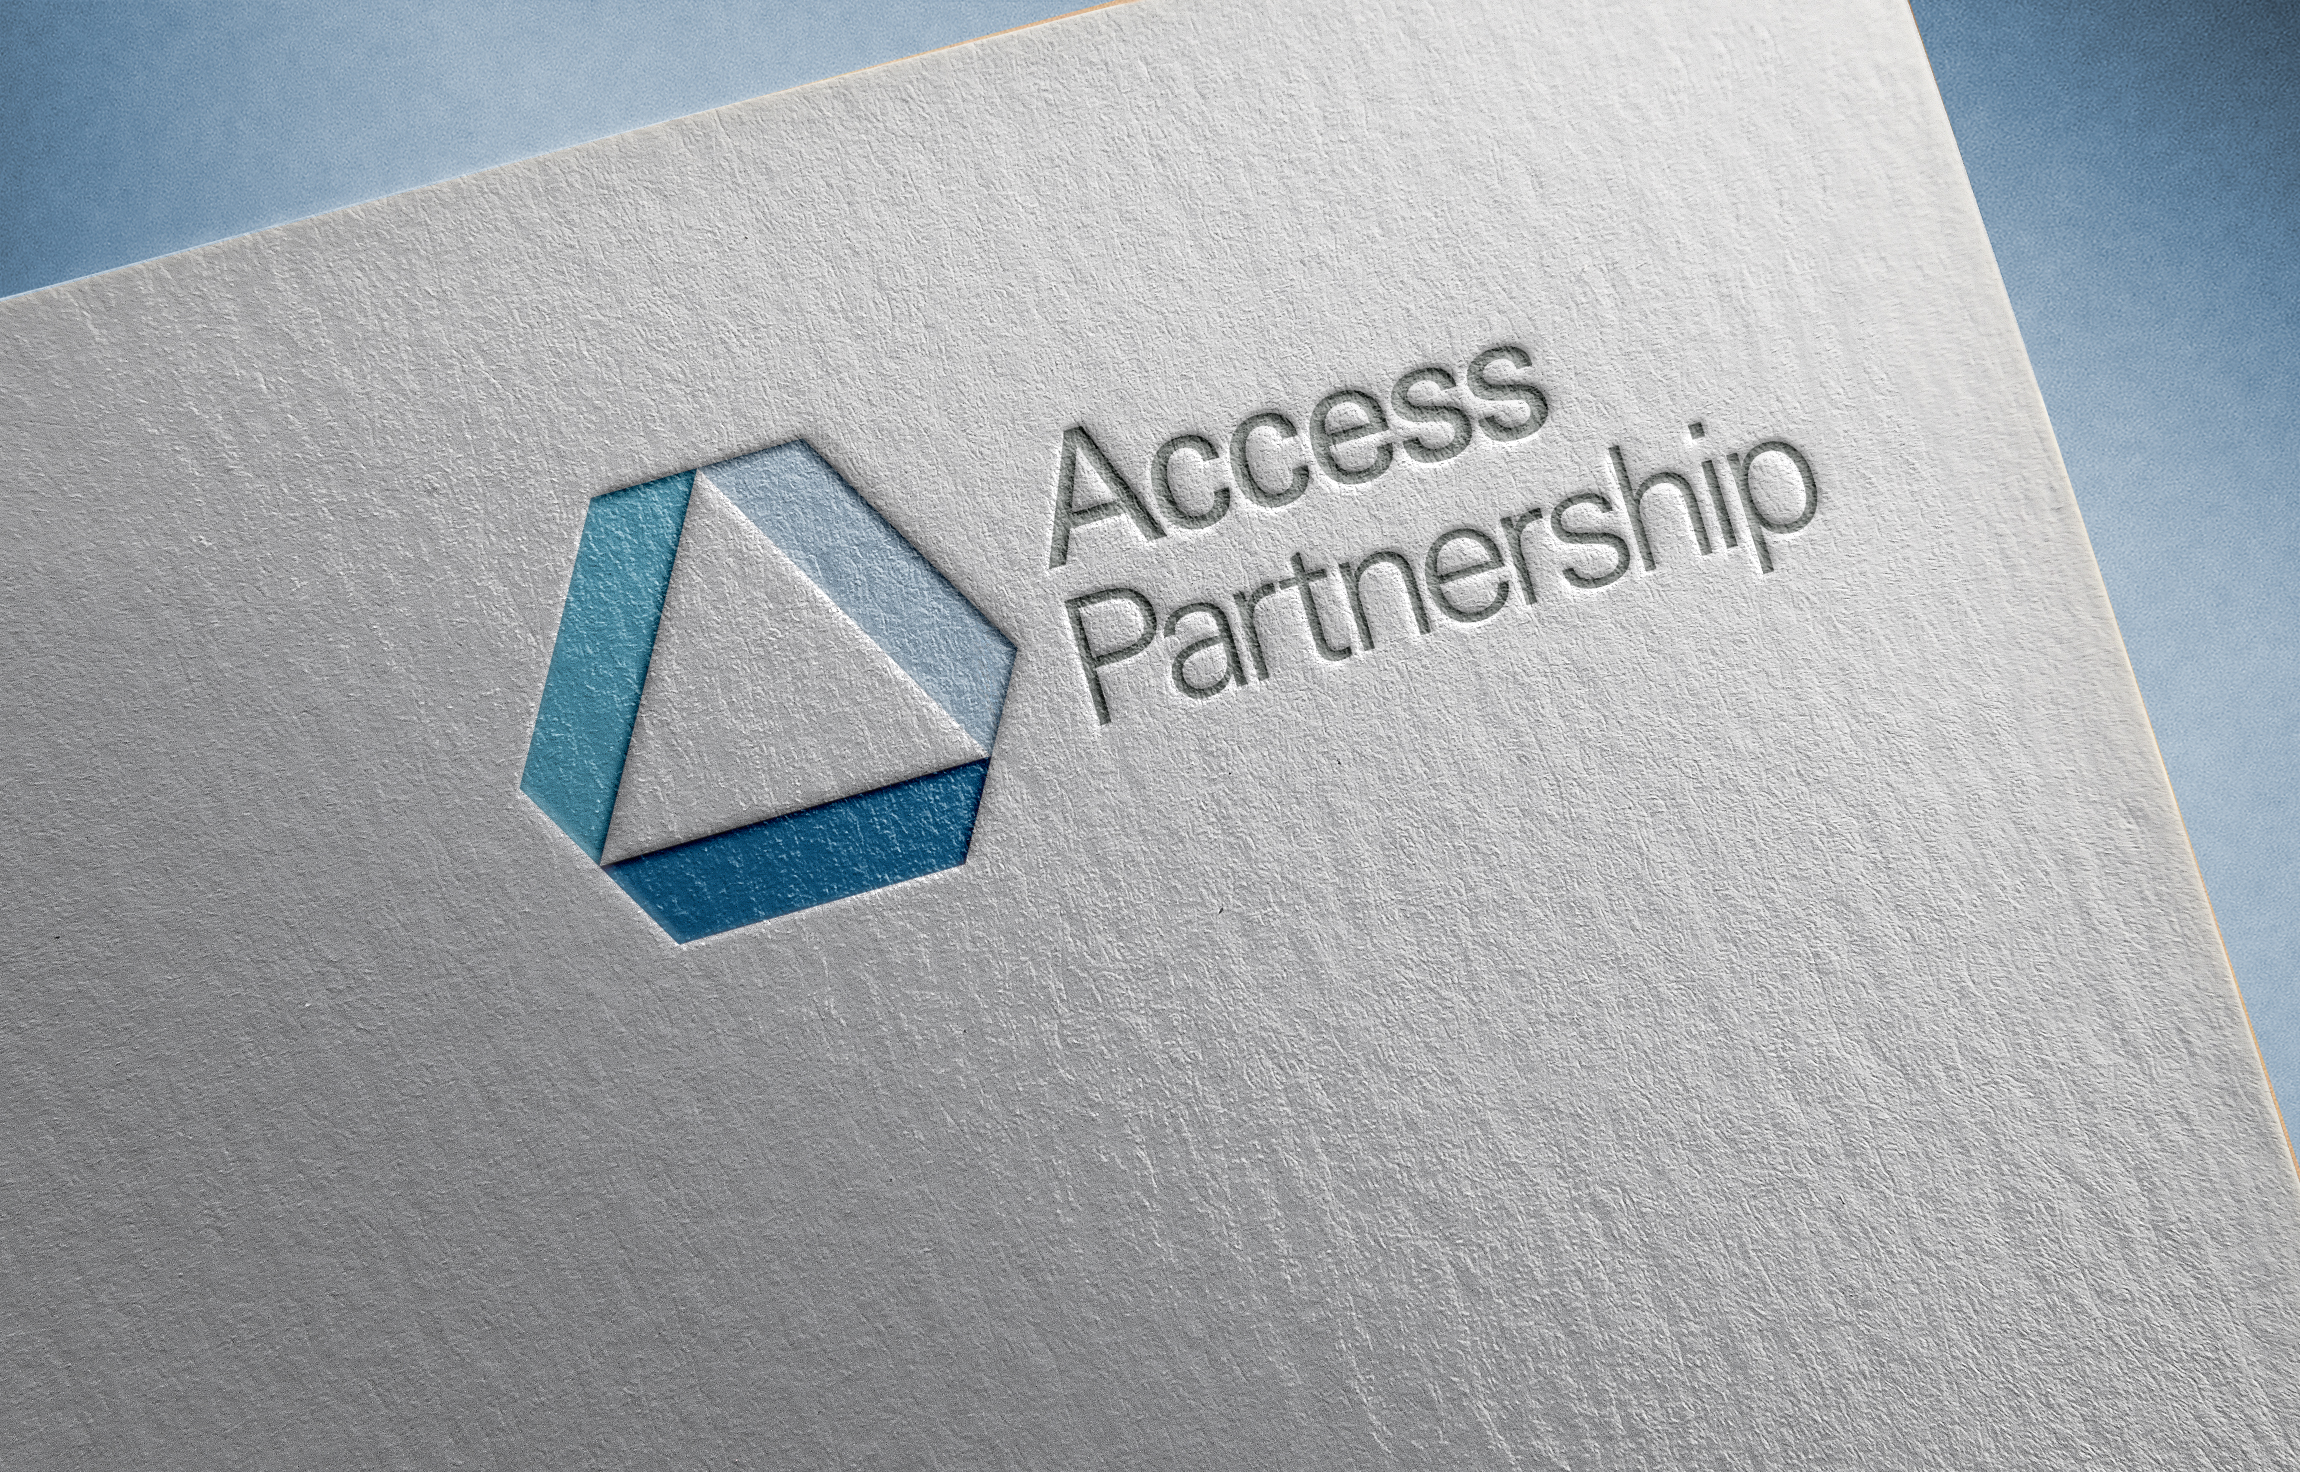 Access Partnership Welcomes Stephen Thompson as Senior Advisor for Cybersecurity